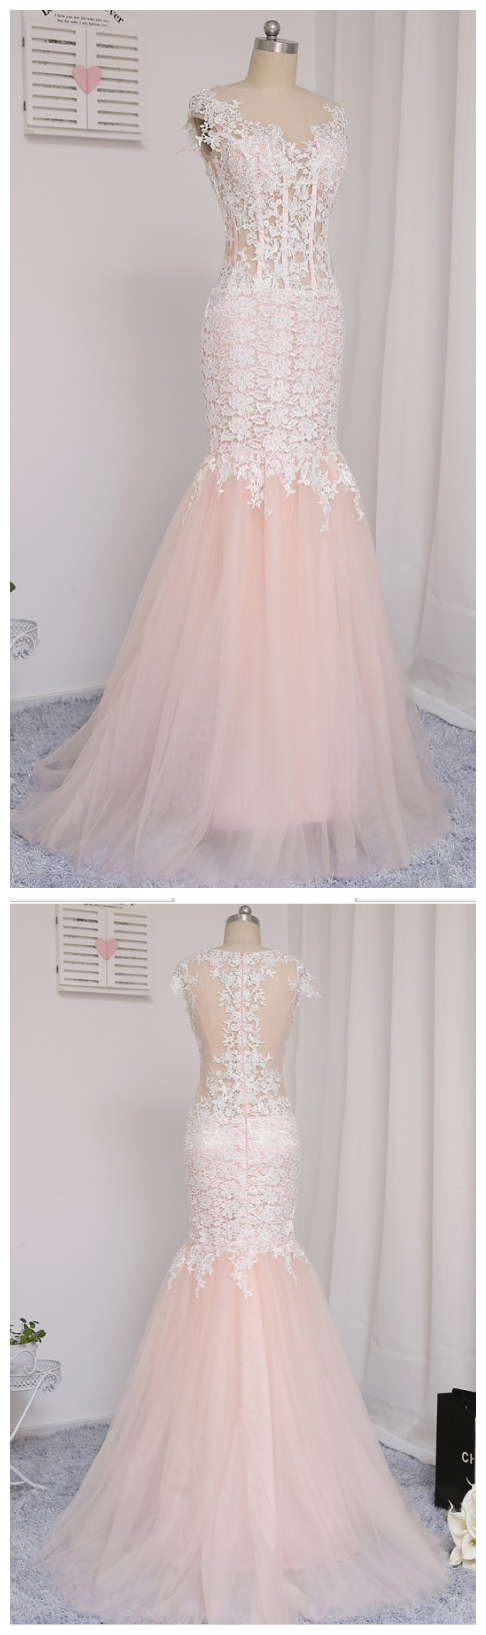 Prom Dresses, Mermaid See Through Tulle Appliques Lace Long Prom Gown ...